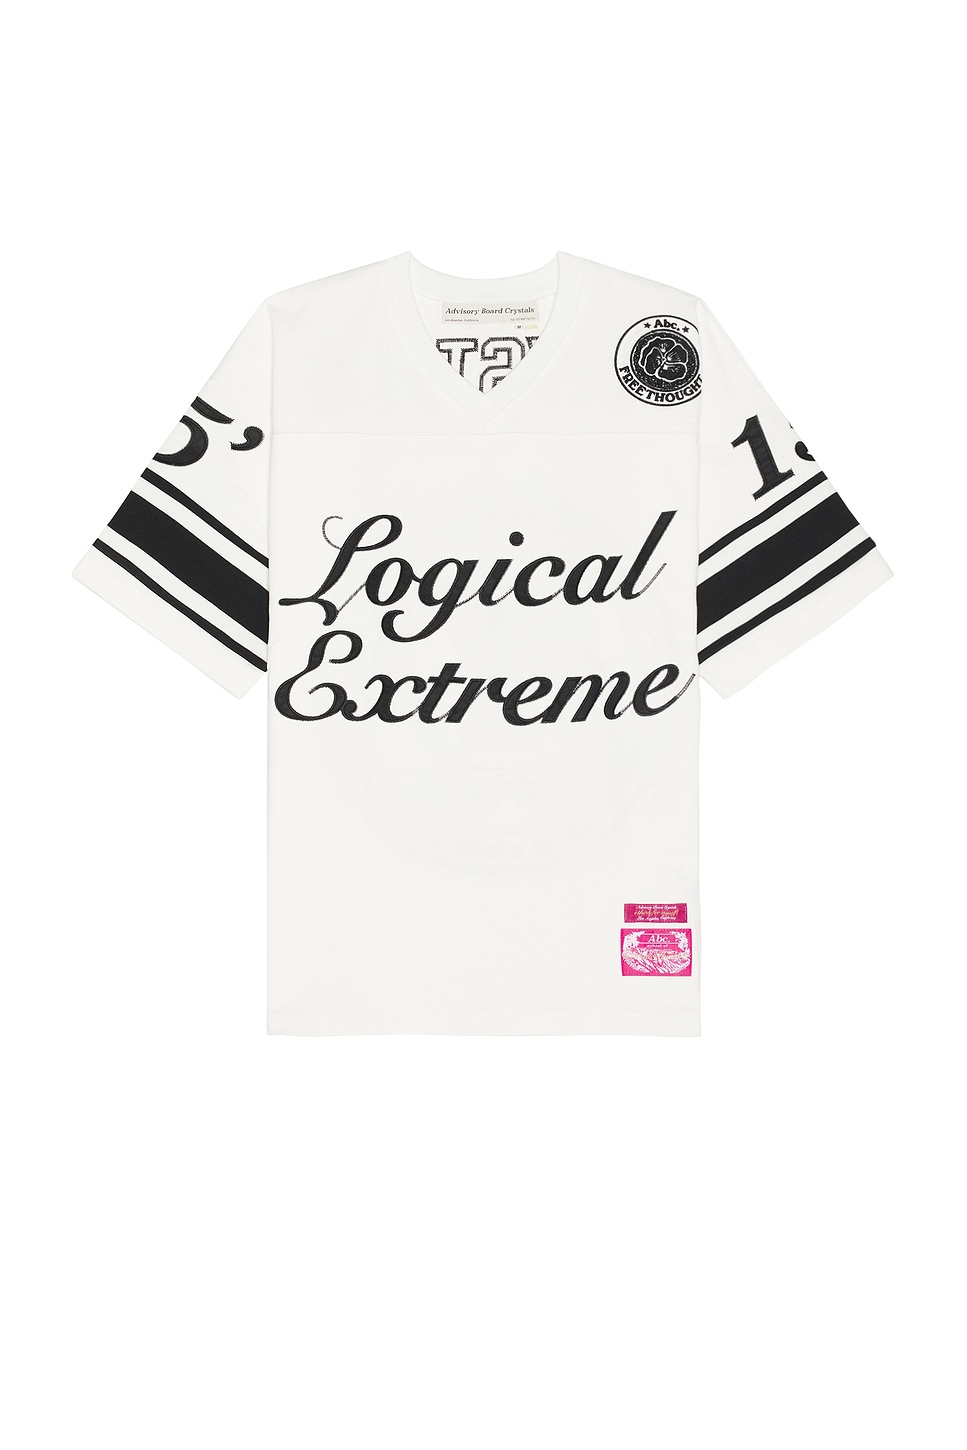 Image 1 of Advisory Board Crystals Logical Extreme Rugby Shirt in White